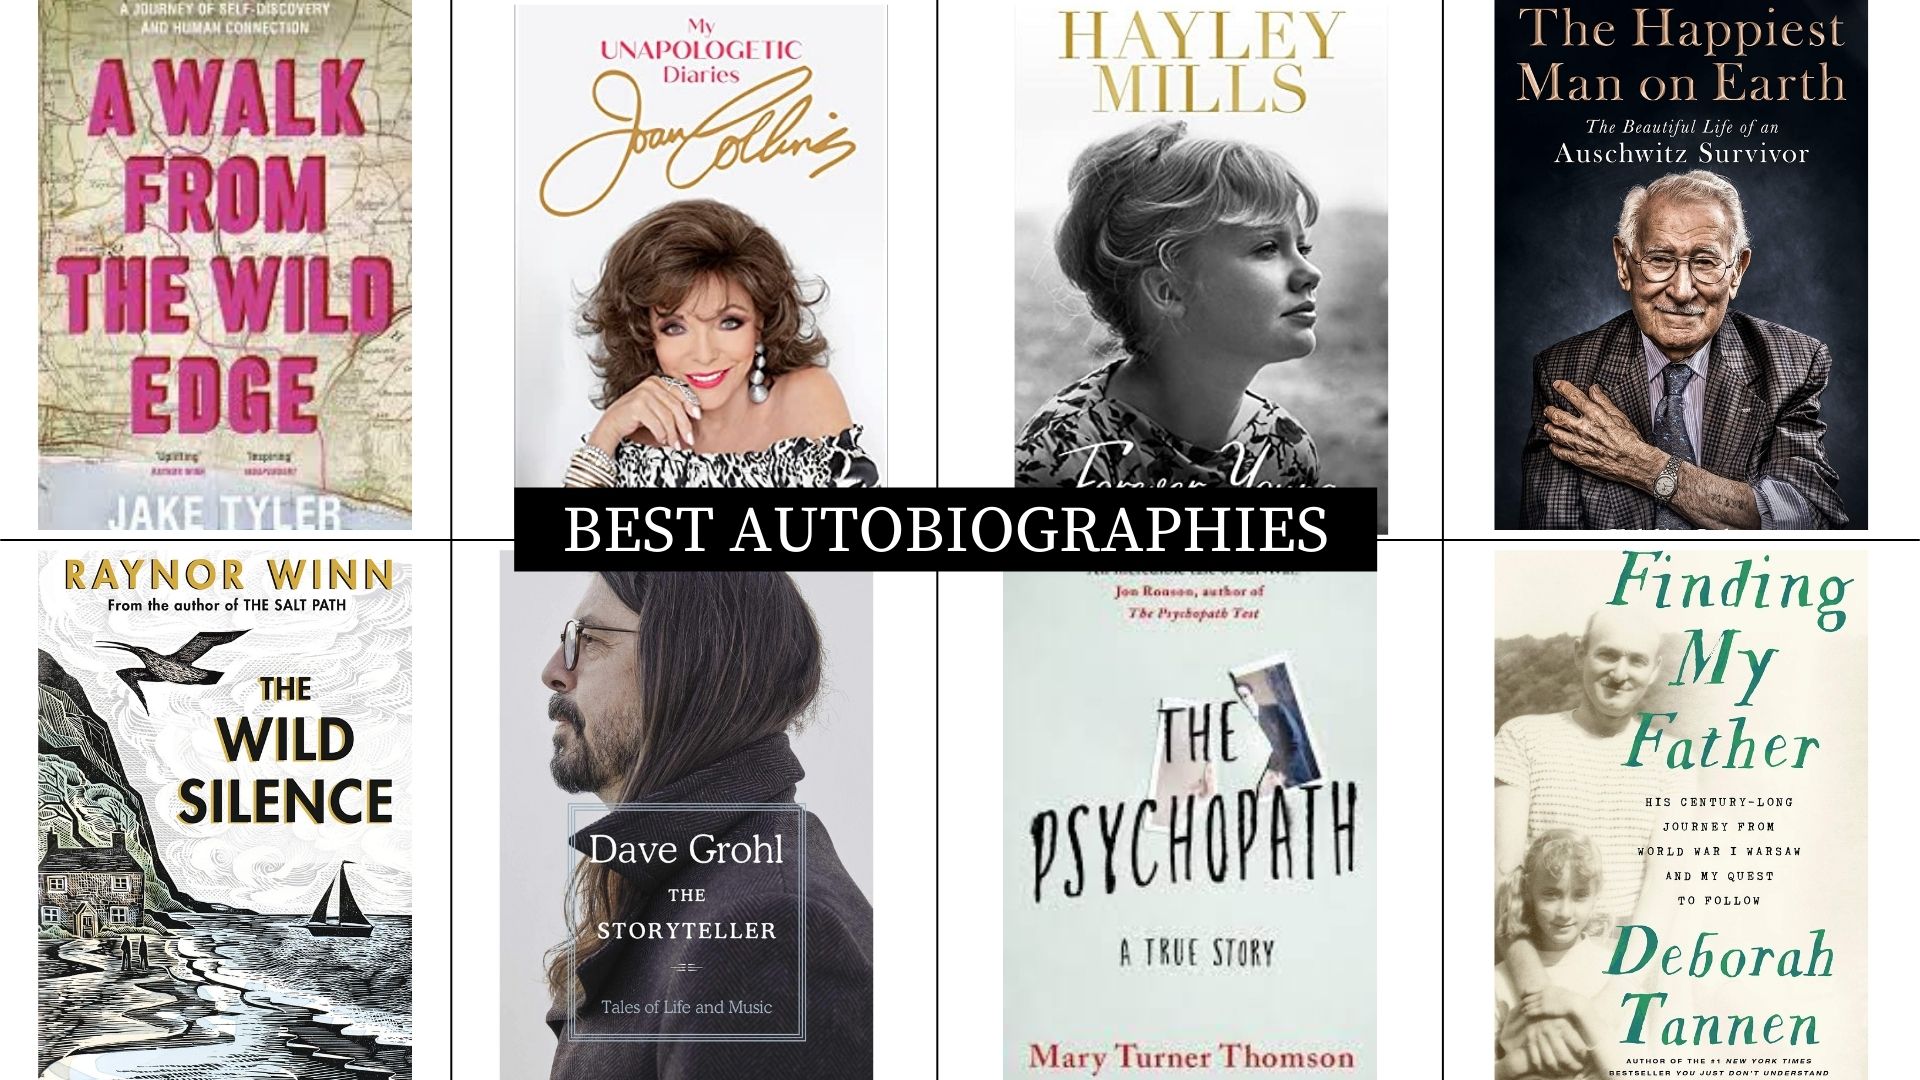 19 of the best autobiographies that will fascinate and inspire you